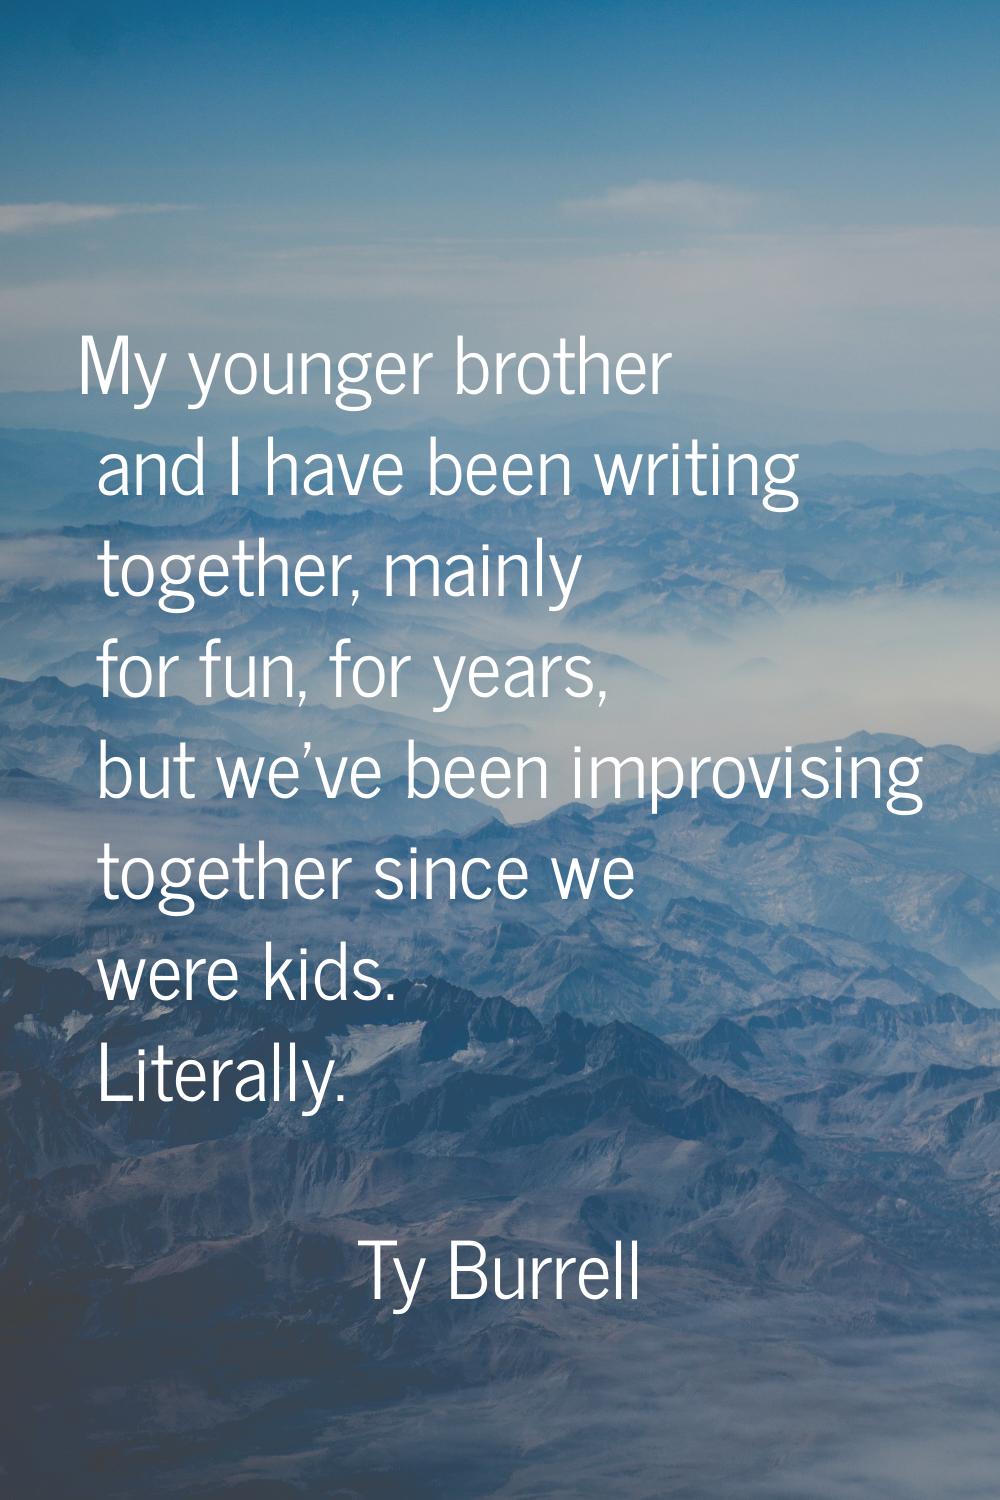 My younger brother and I have been writing together, mainly for fun, for years, but we've been impr